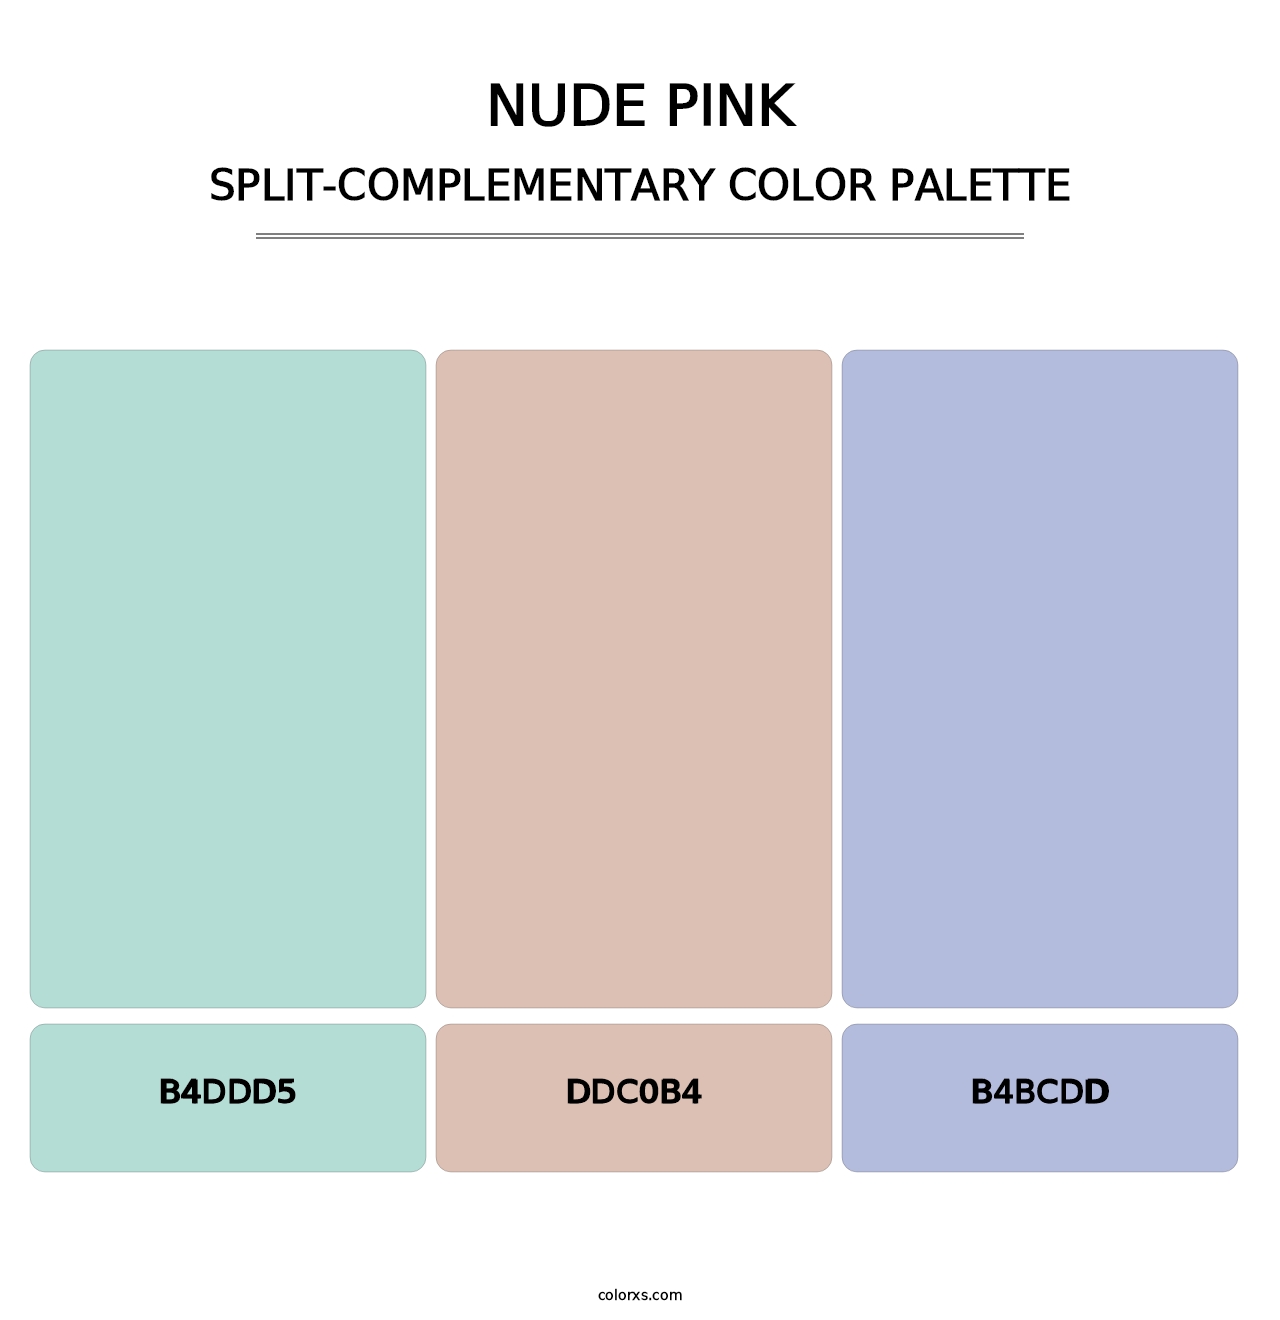 Nude Pink - Split-Complementary Color Palette